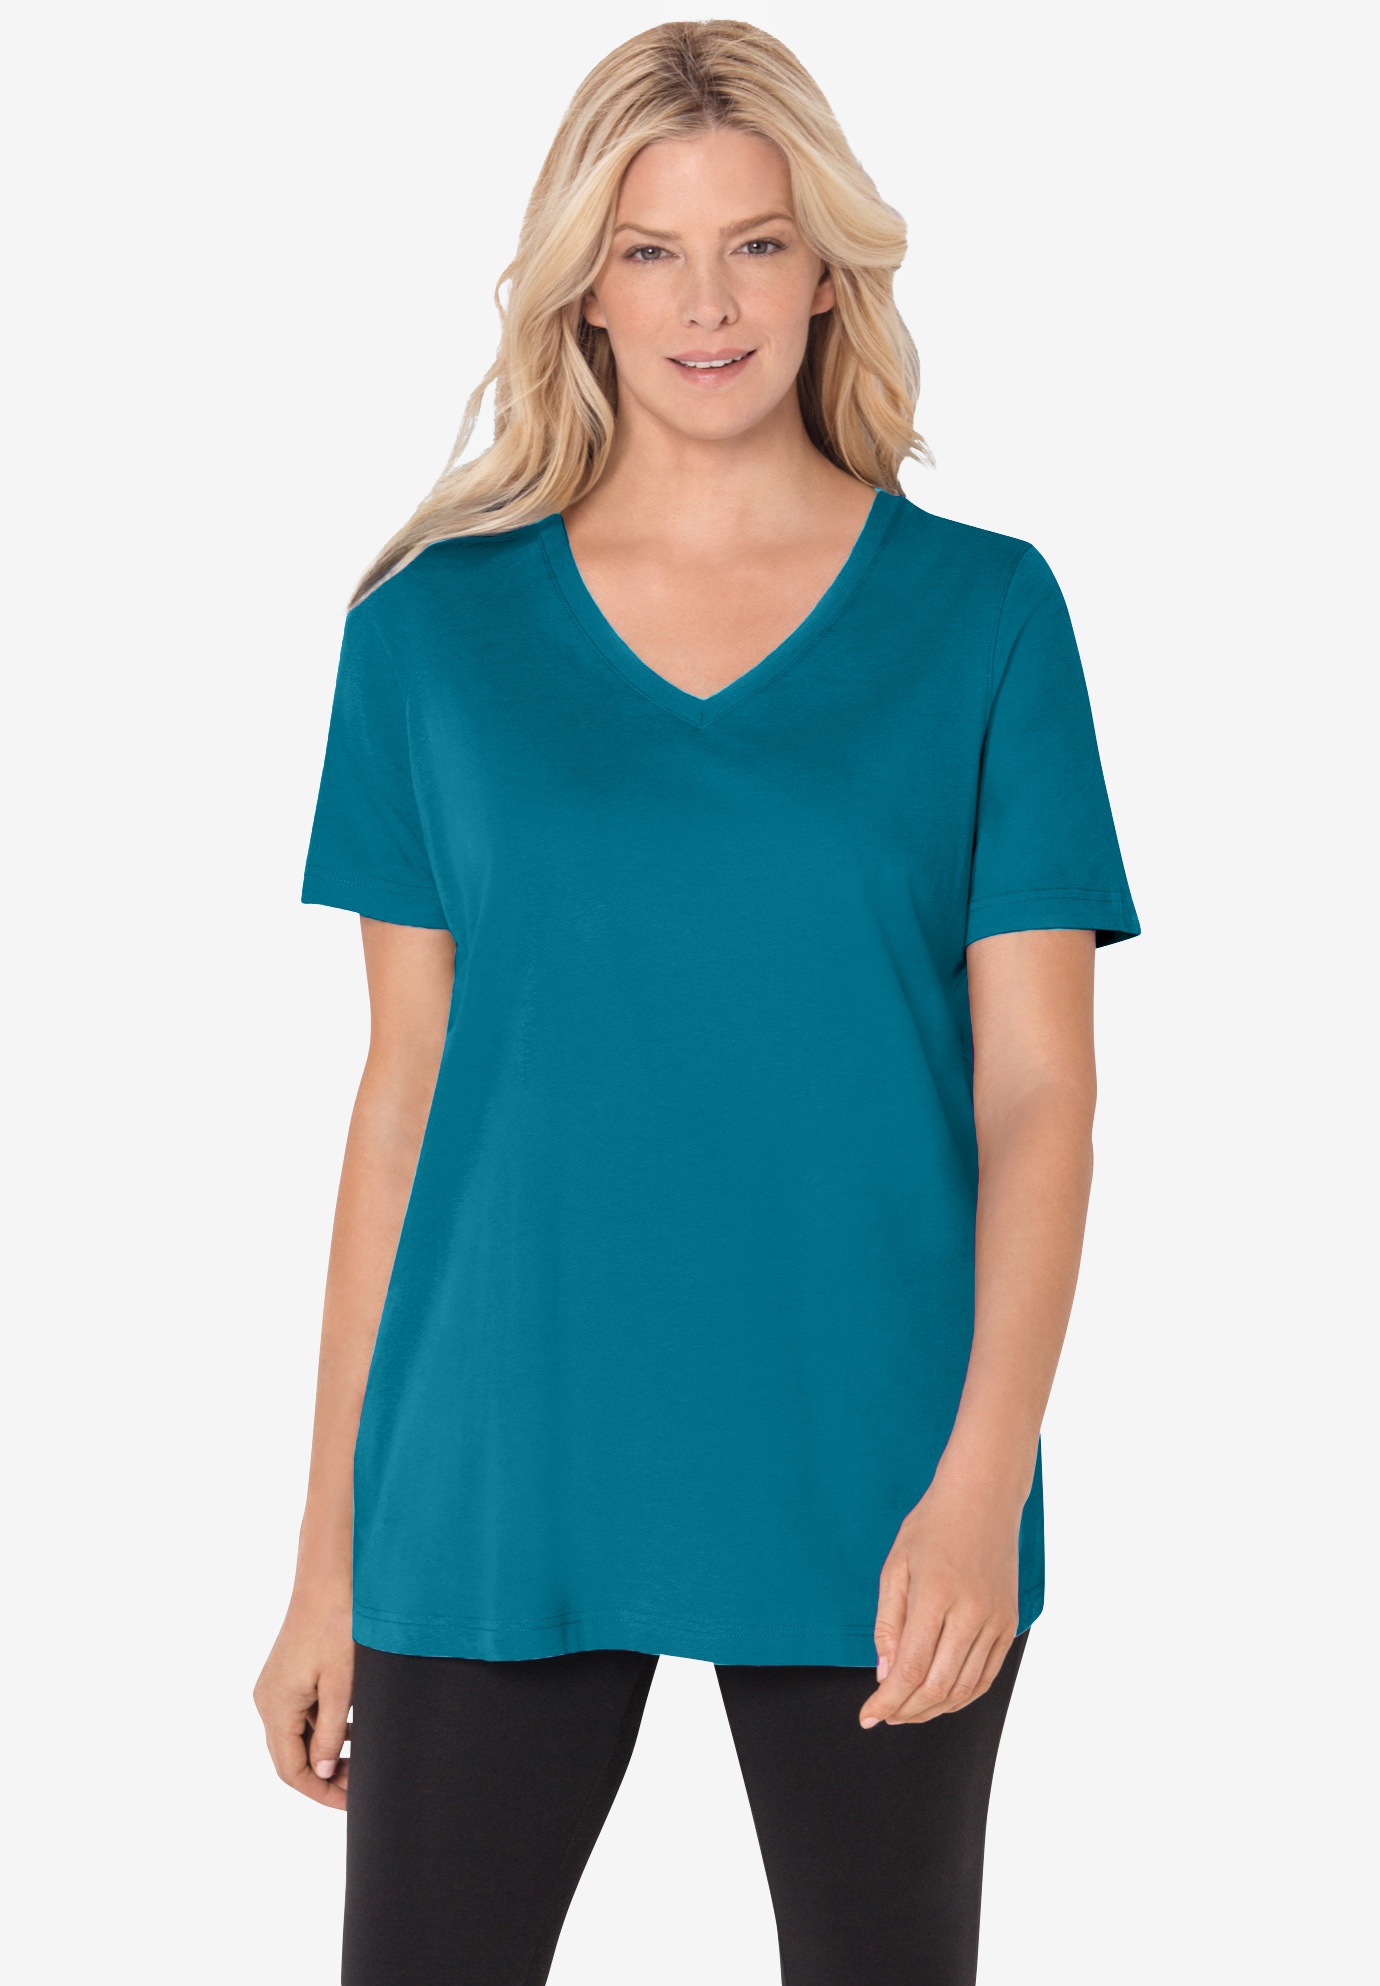 Perfect V-Neck Tee| Plus Size T-Shirts | Woman Within